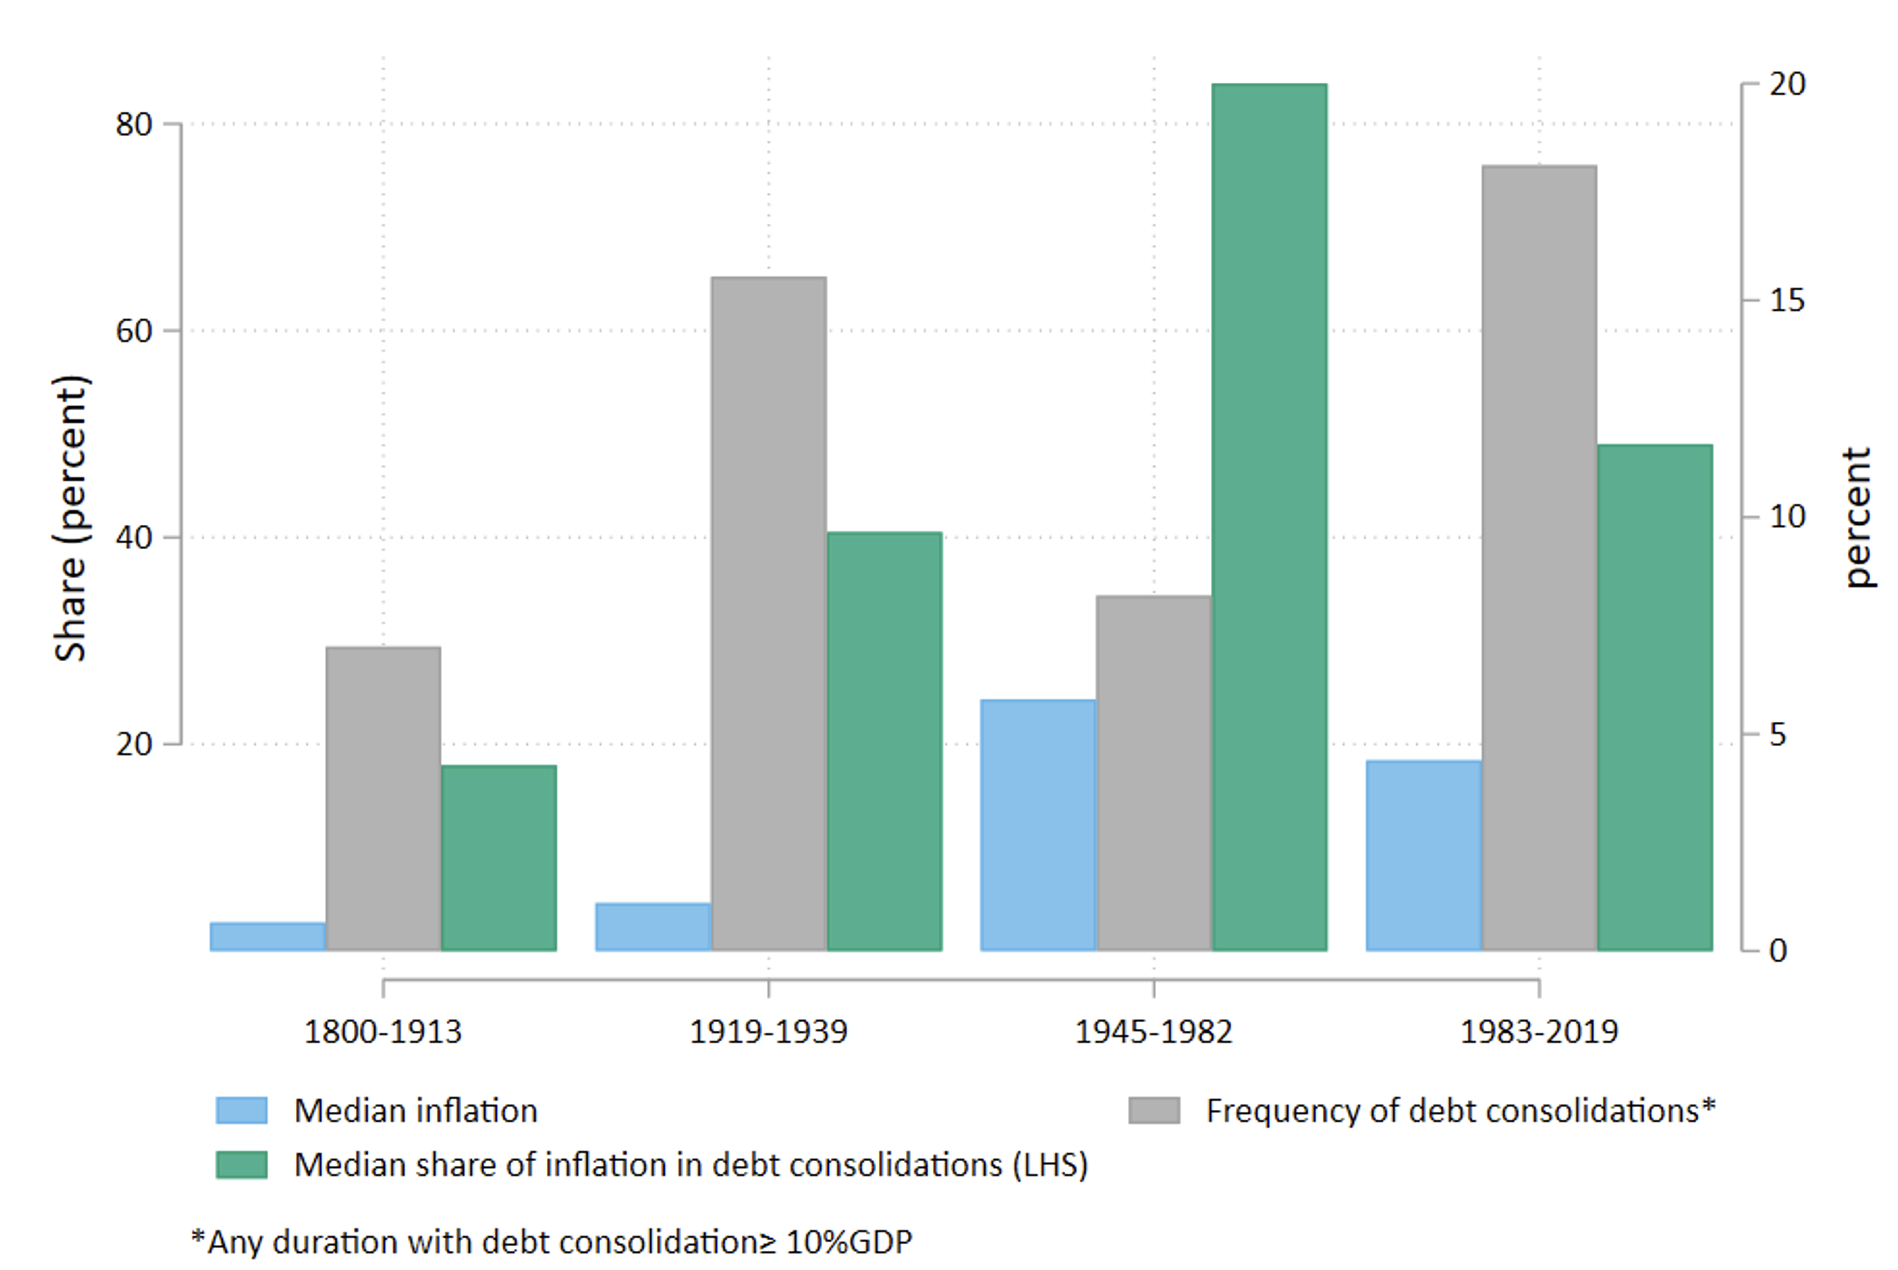 Figure 3 Debt consolidations versus inflation, by period